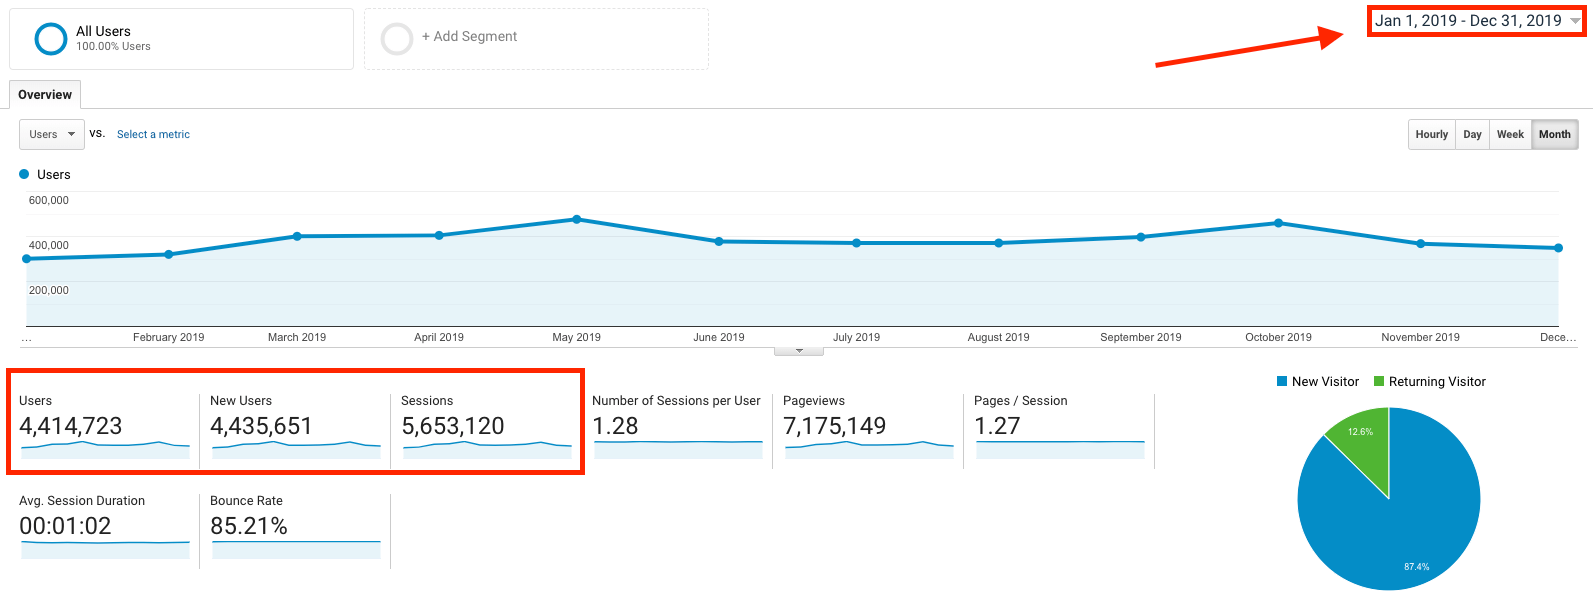 How to Write a Blog Post That Get's Traffic (Google Analytics Screenshot) Proof of Readers on ryrob